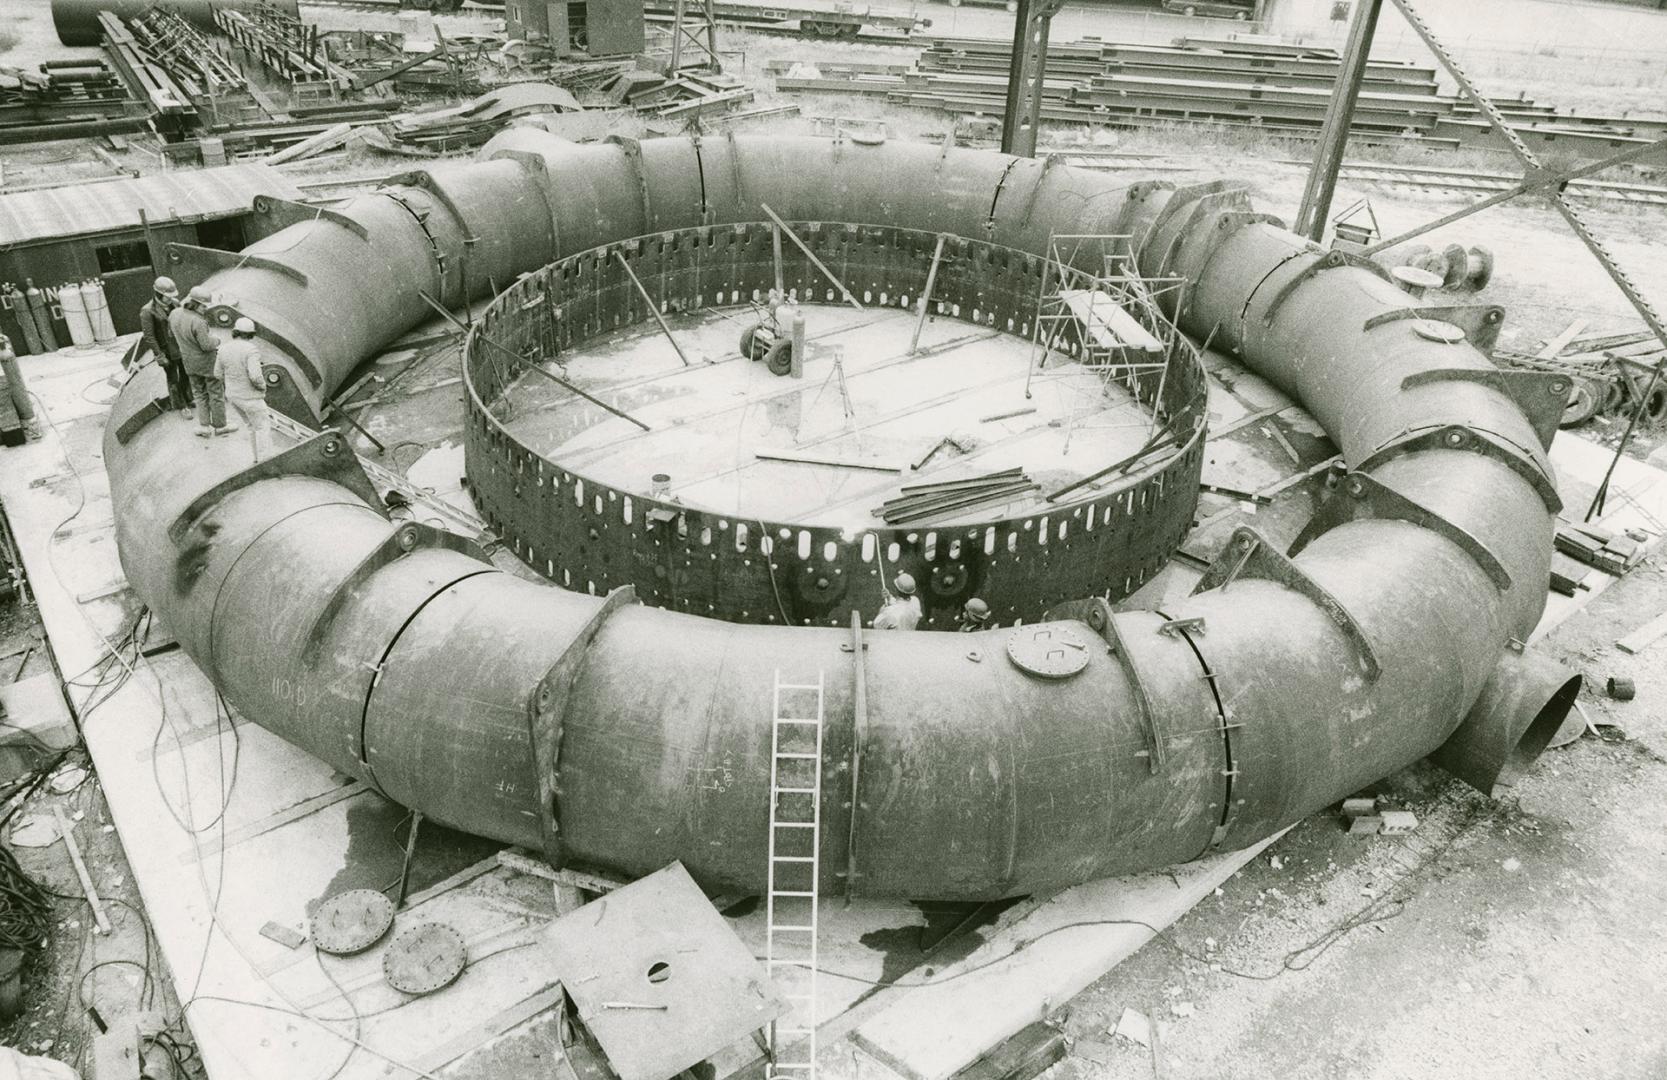 Assembly Of Bustle Pipe For Blast Furnace At Dominion Bridge Company 